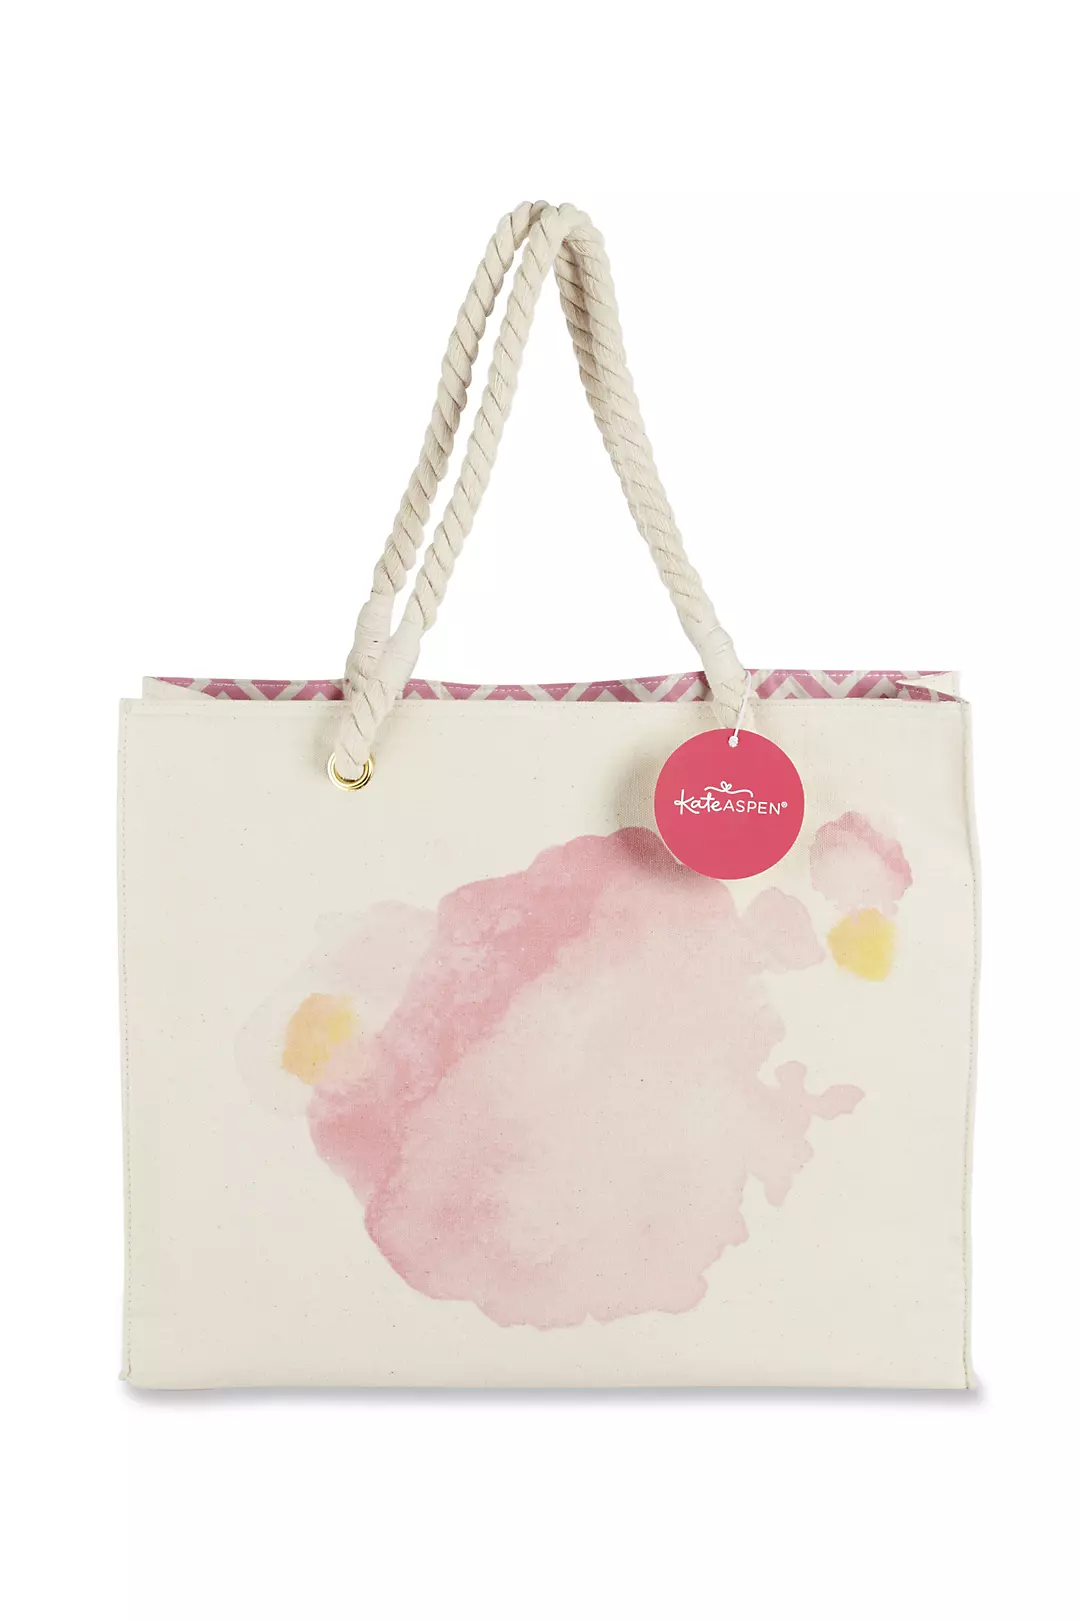 Watercolor Canvas Tote Bag With Rope Handles Image 1